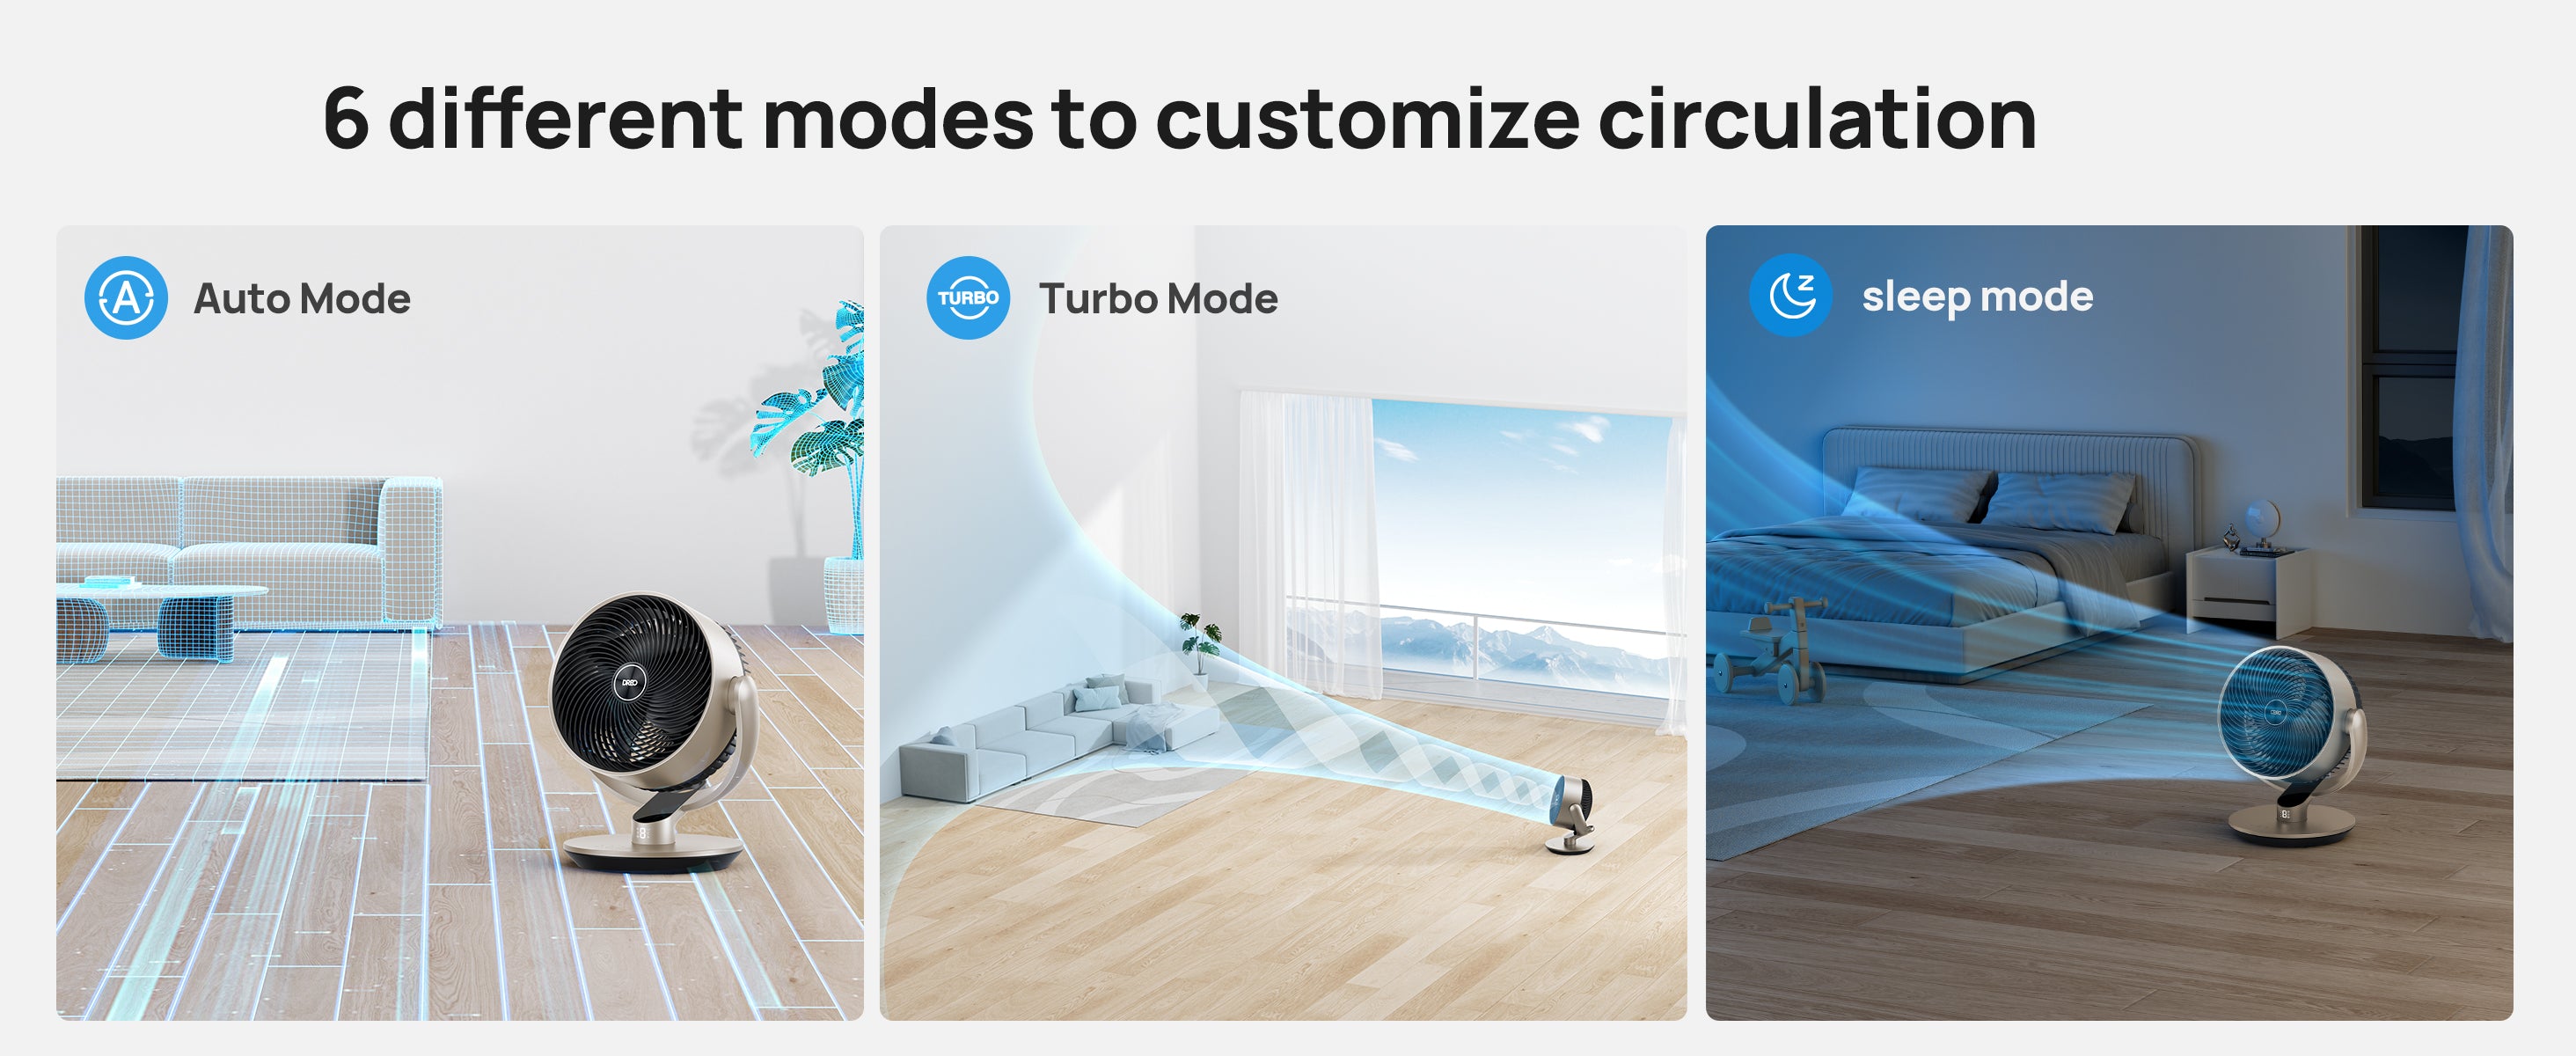 6 different modes to customize circulation